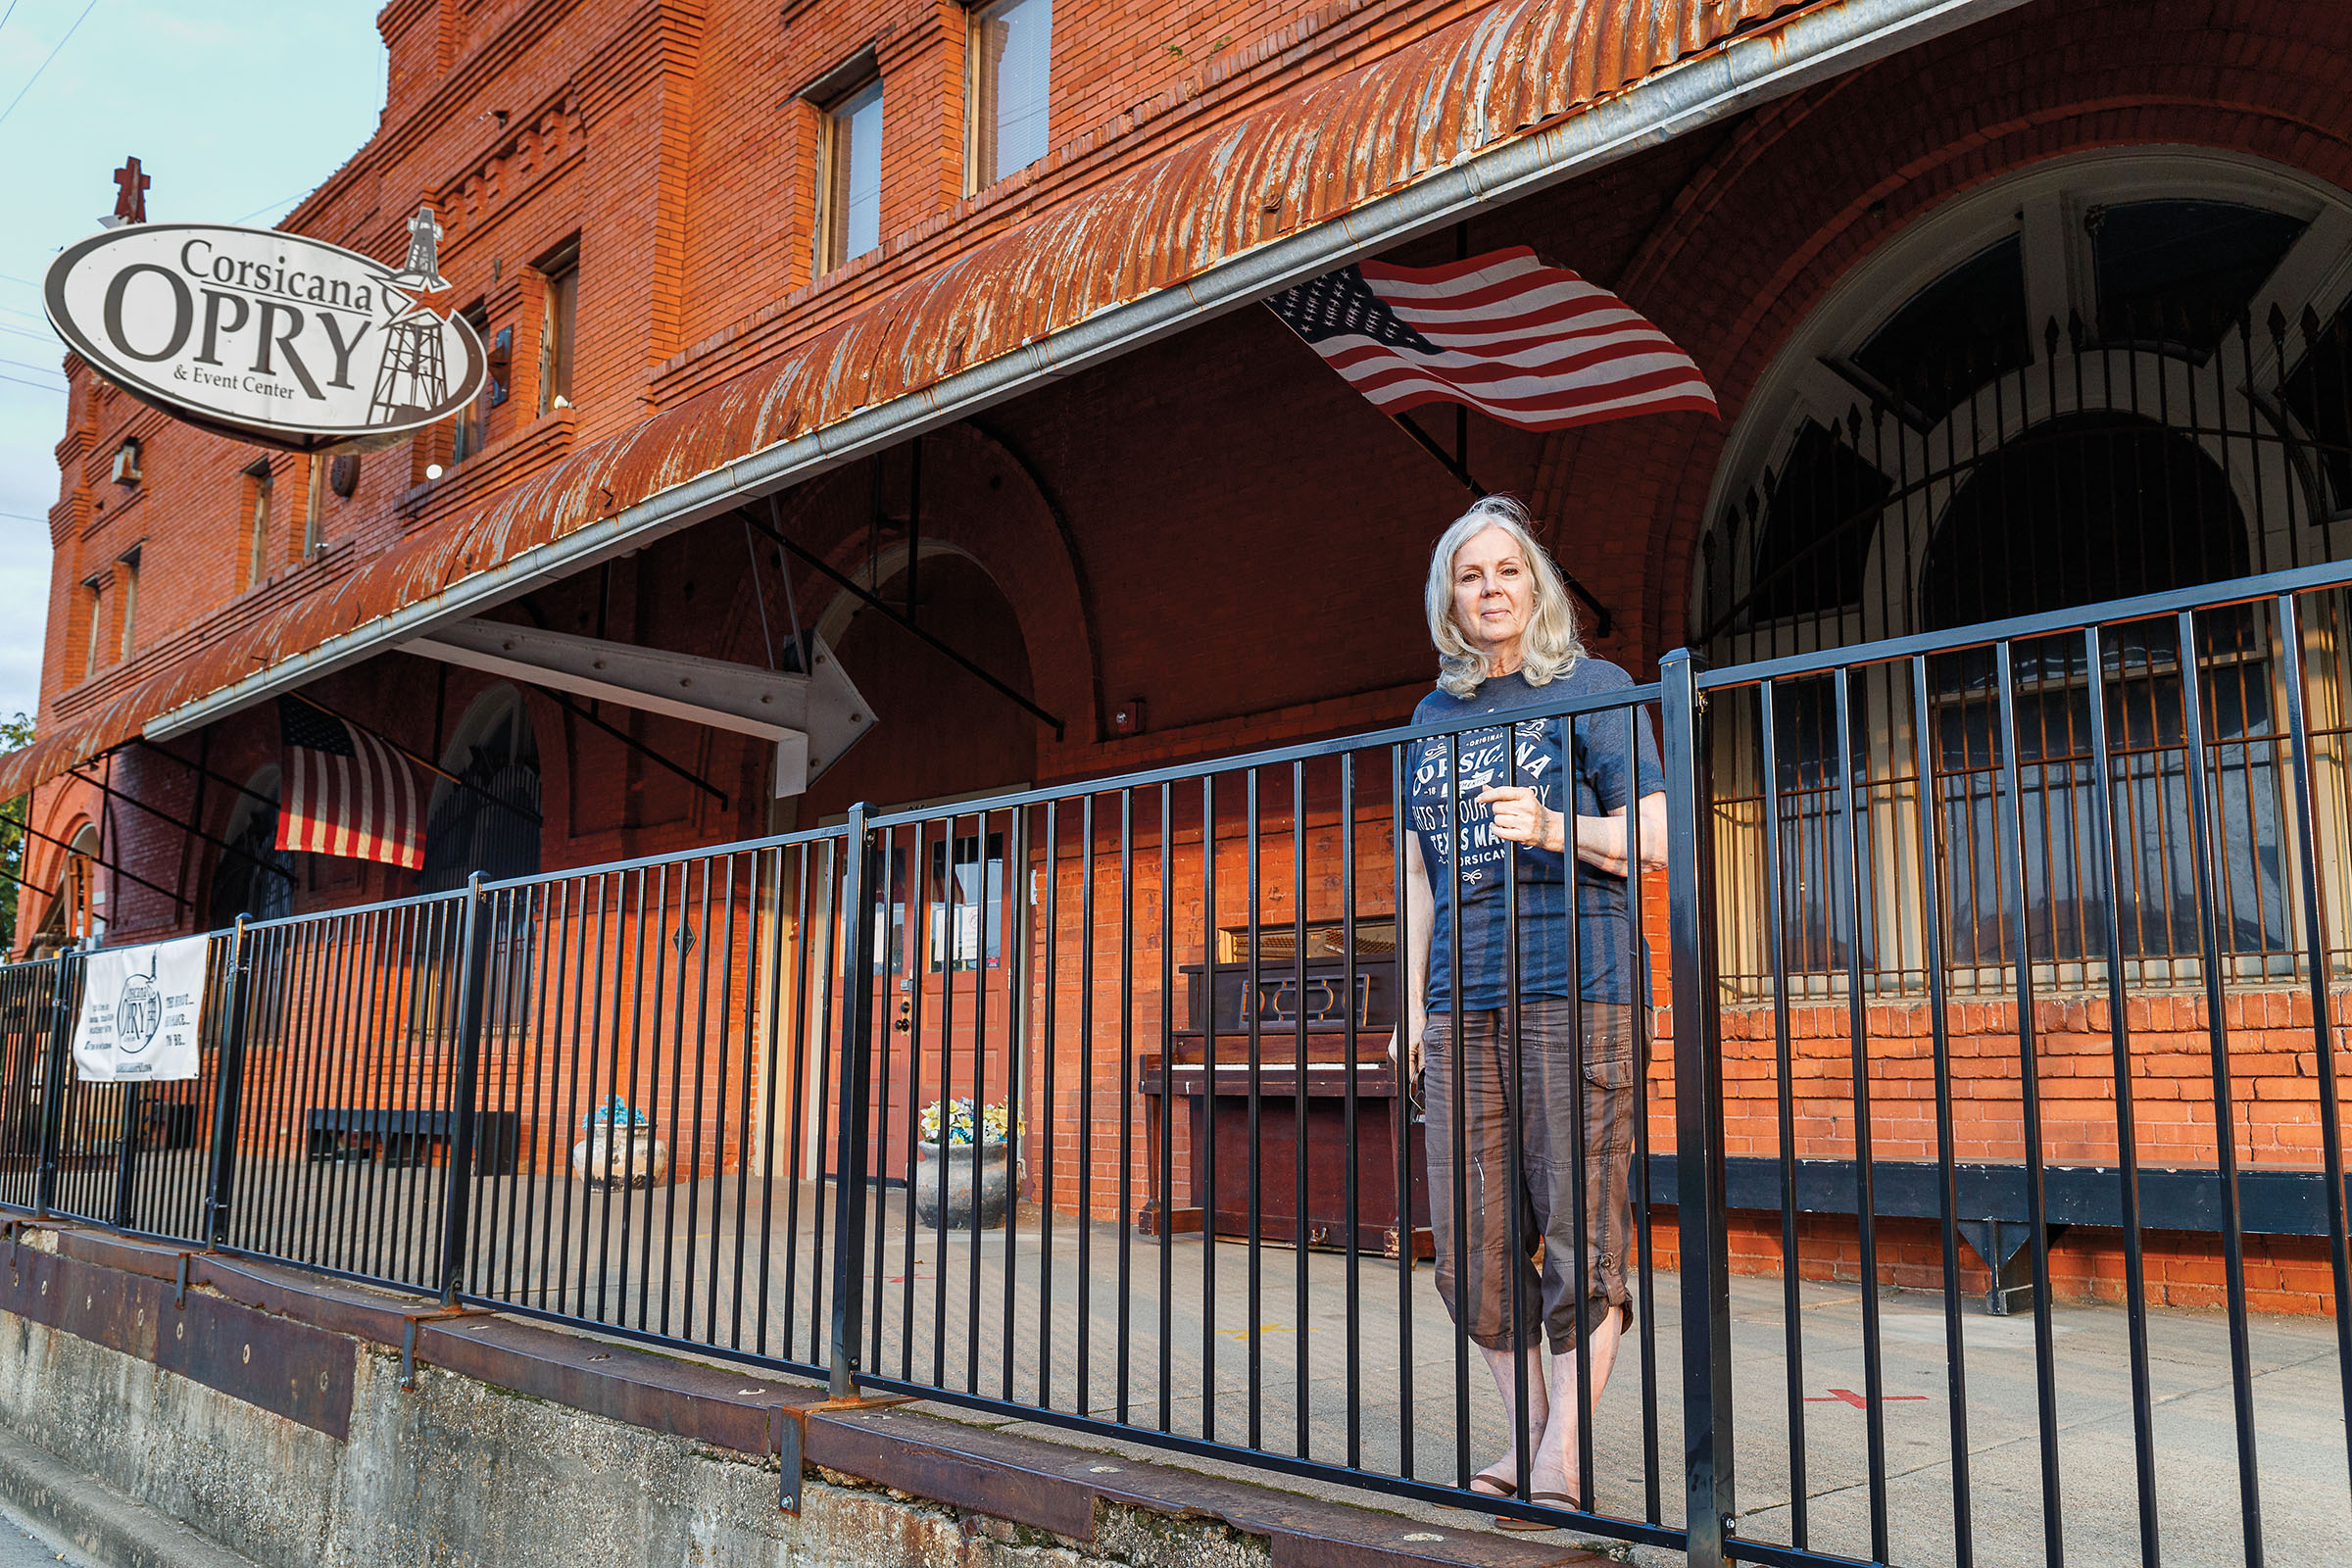 A woman stands on a concrete slab behind an iron fence under a sign reading "Corsicana Opry"